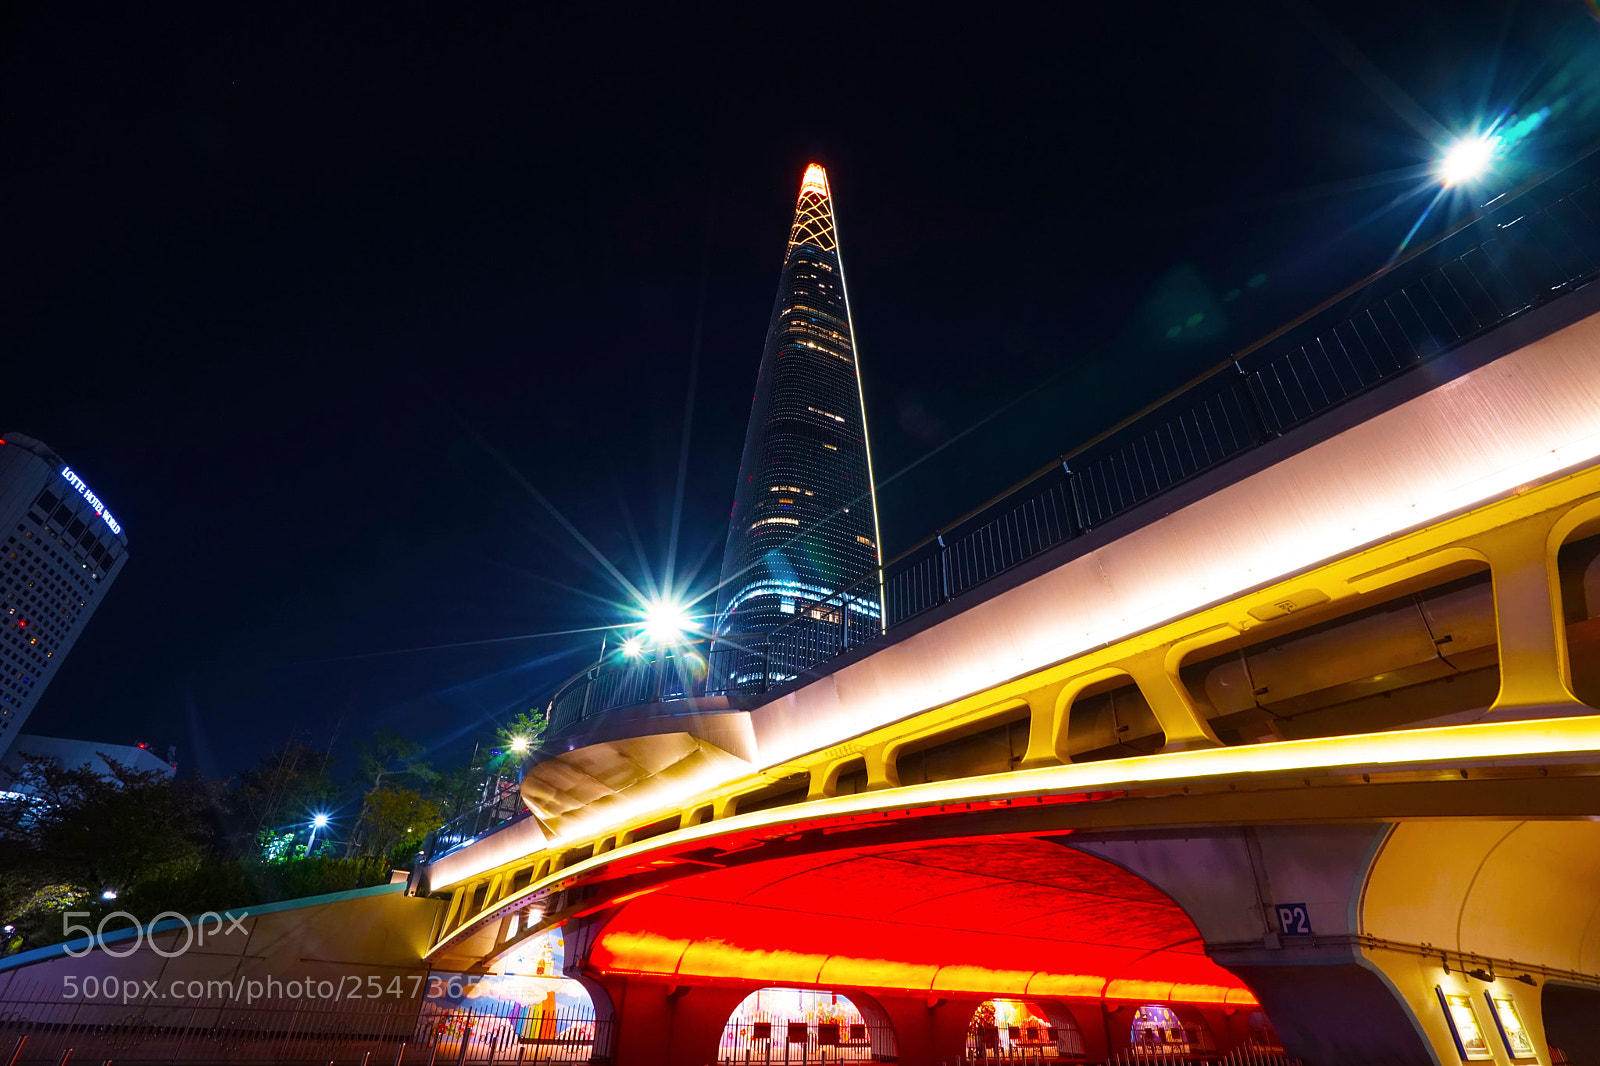 Sony a7 sample photo. Lotte tower photography